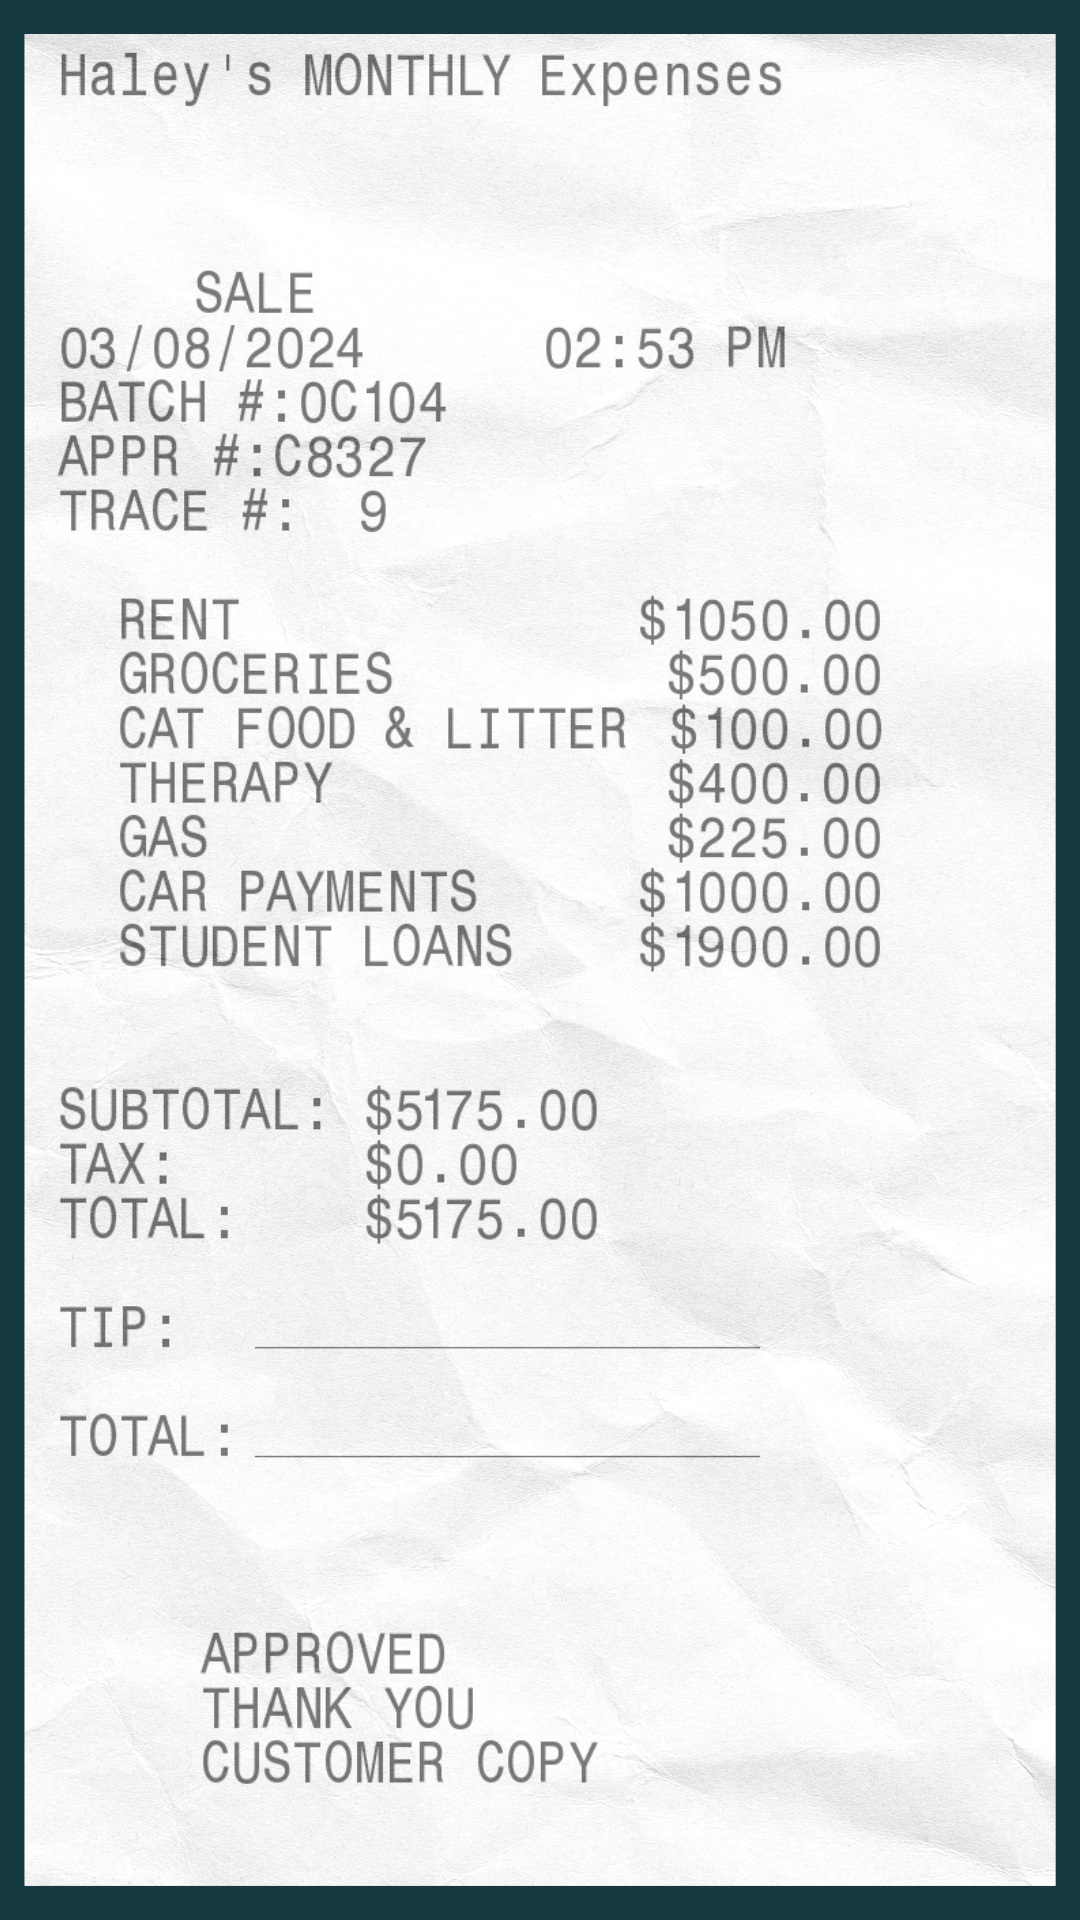 Receipt with itemized expenses including rent, groceries, and car payments, totaling $5175.00, indicating high living costs